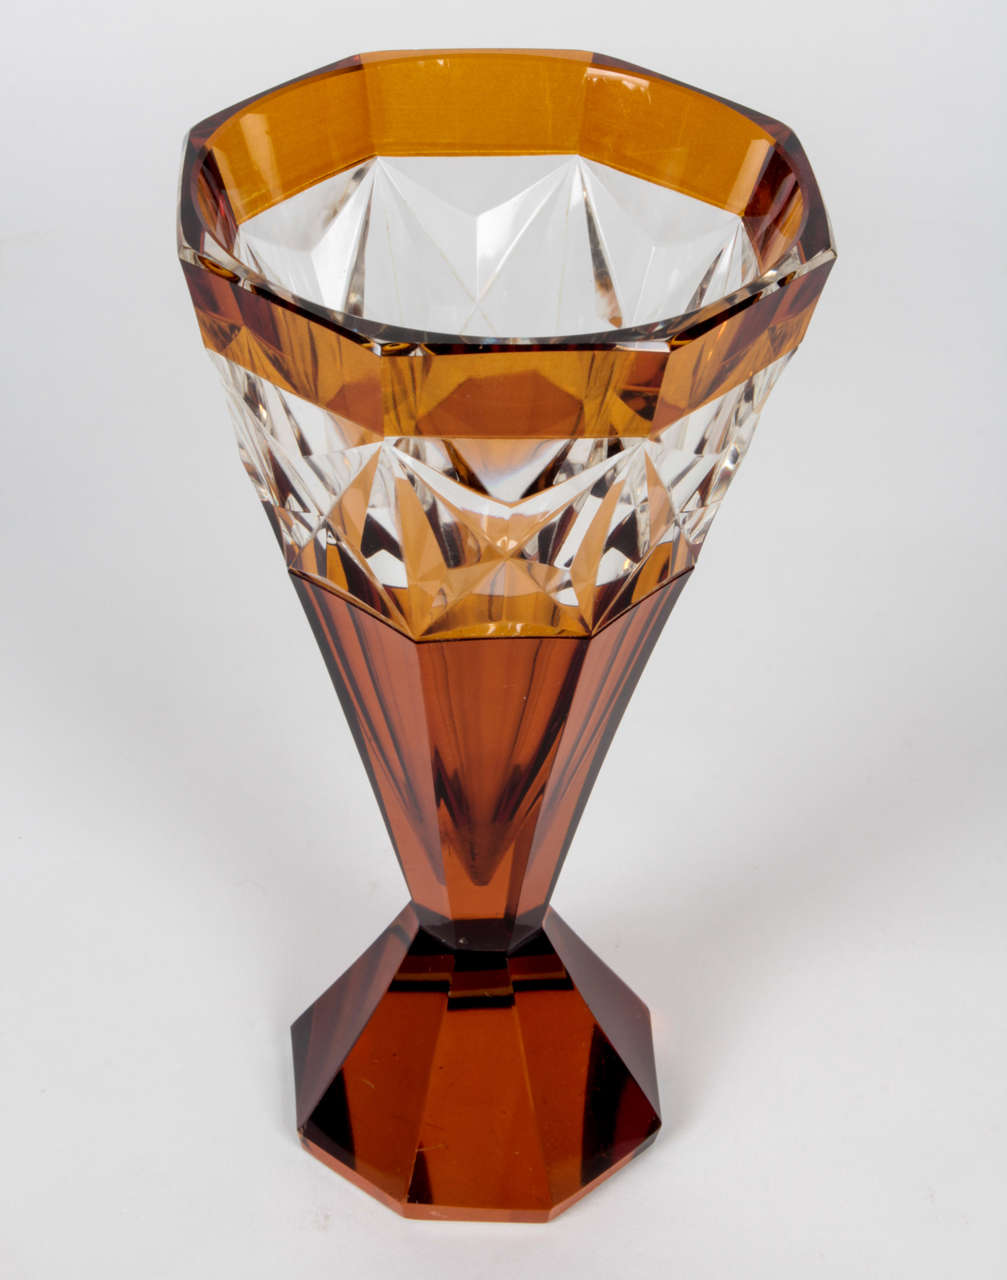 Czech Cubism / Art Deco Panel-cut crystal vase c. 1912-25 In Excellent Condition For Sale In New York, NY